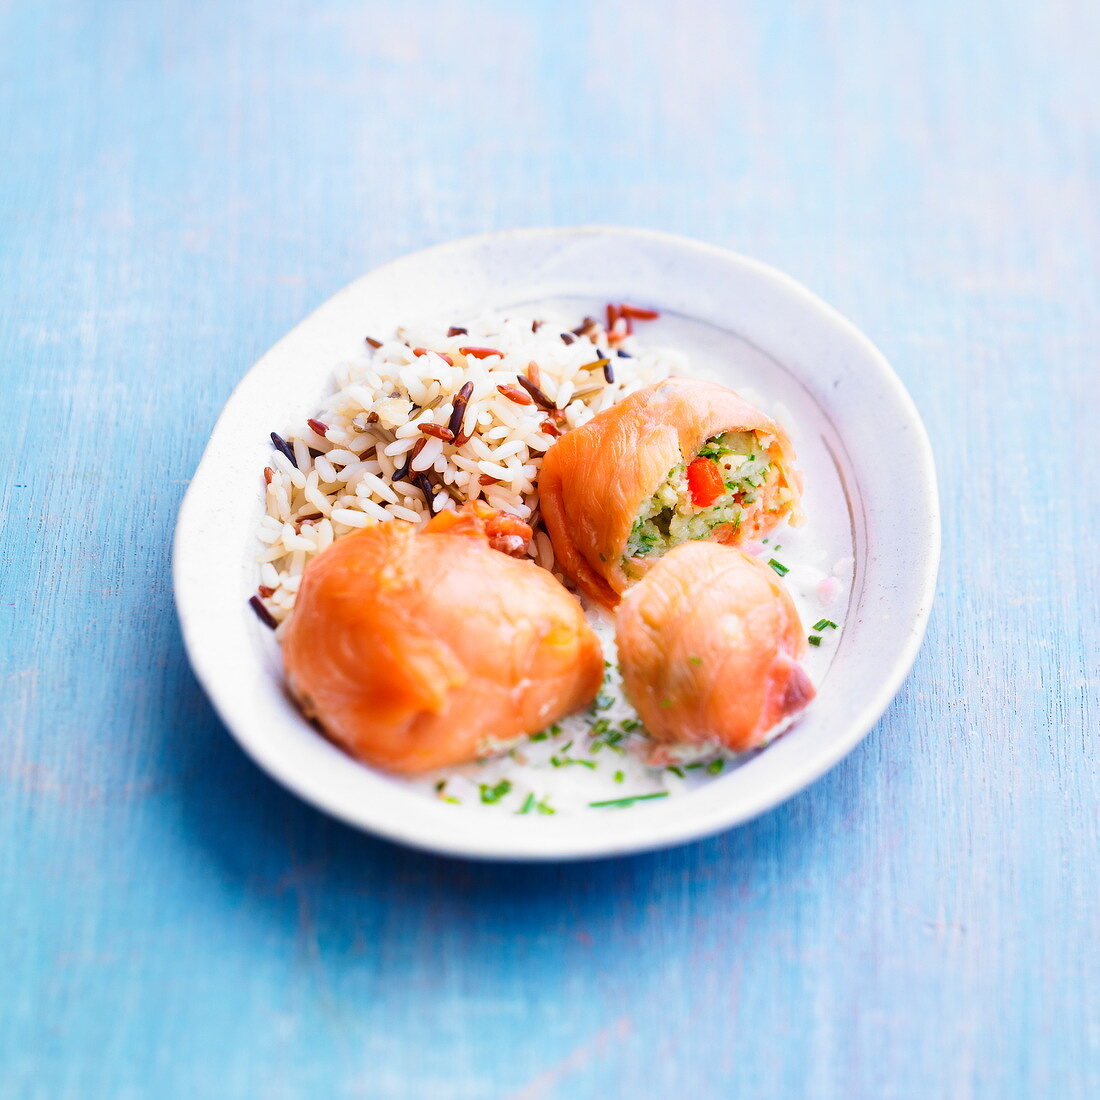 Smoked salmon and cod Paupiettes with rice